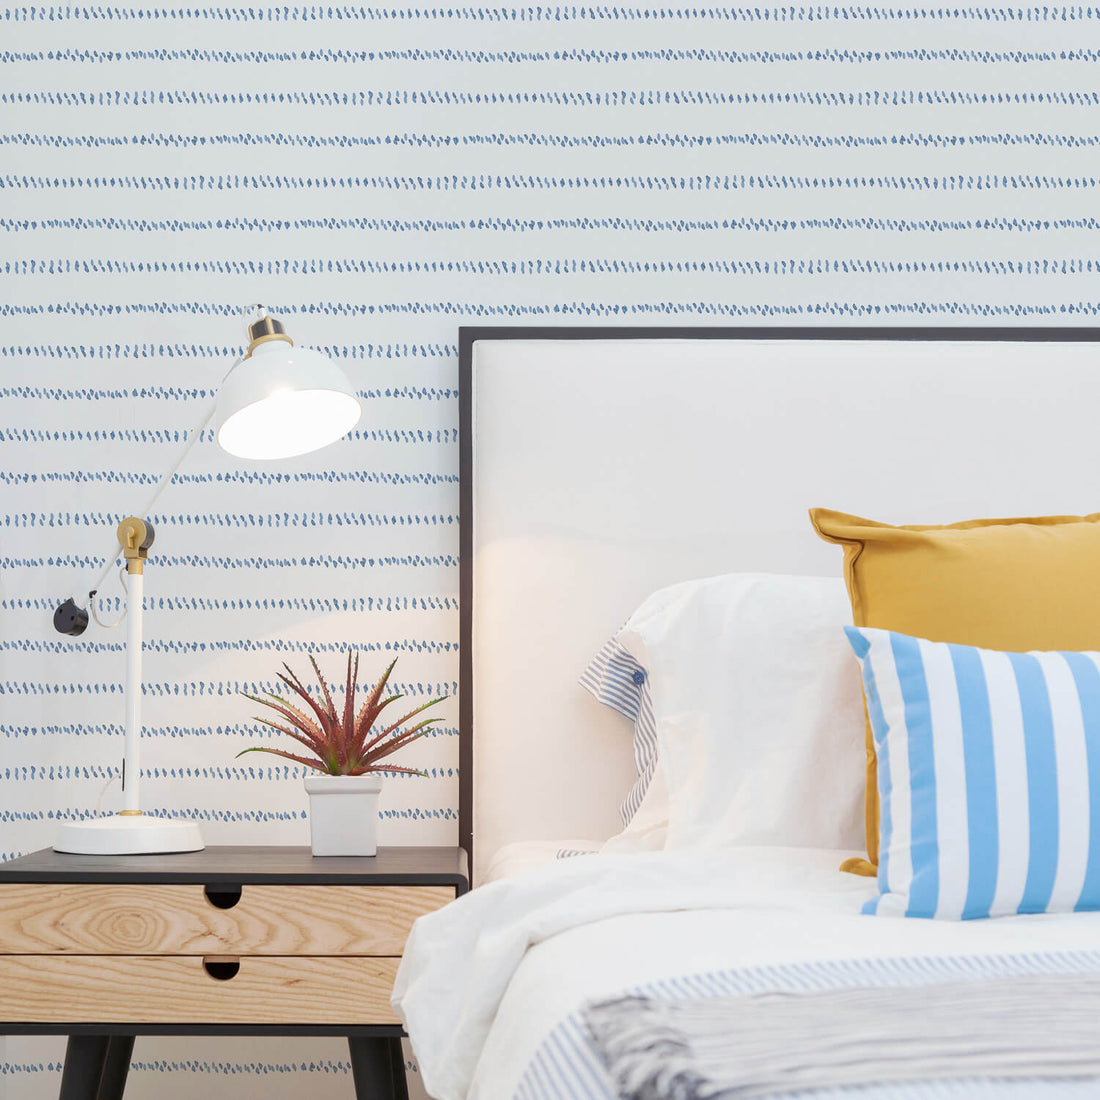 modern beach house kids bedroom interior with blue wire inspired wallpaper